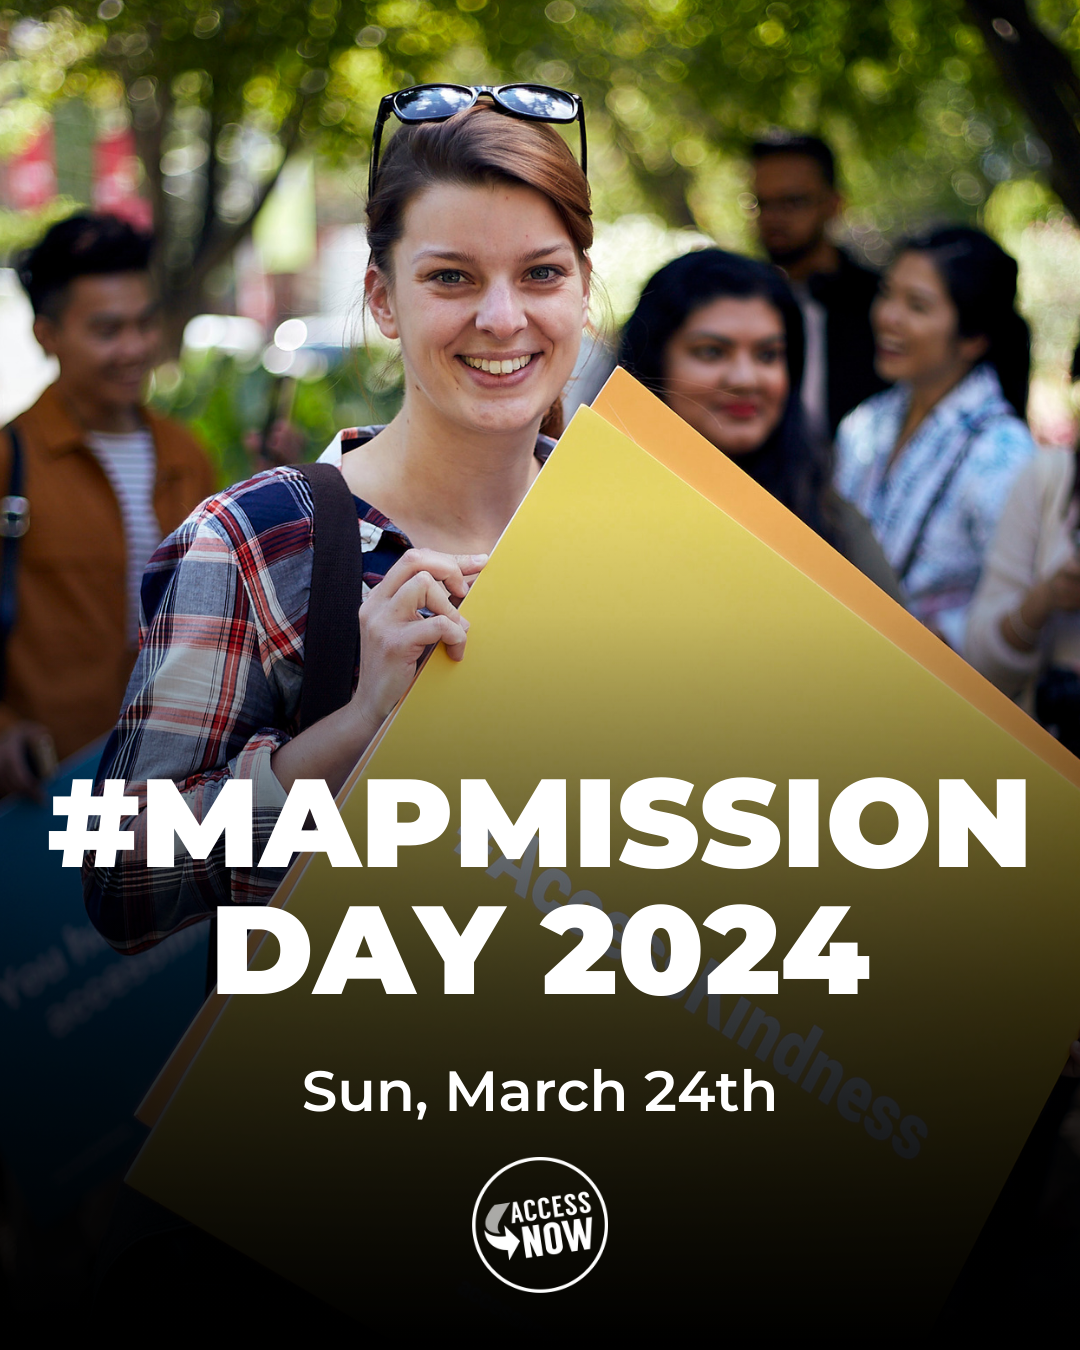 Social graphic to register for MapMission Day 2024, with photo of a woman smiling.